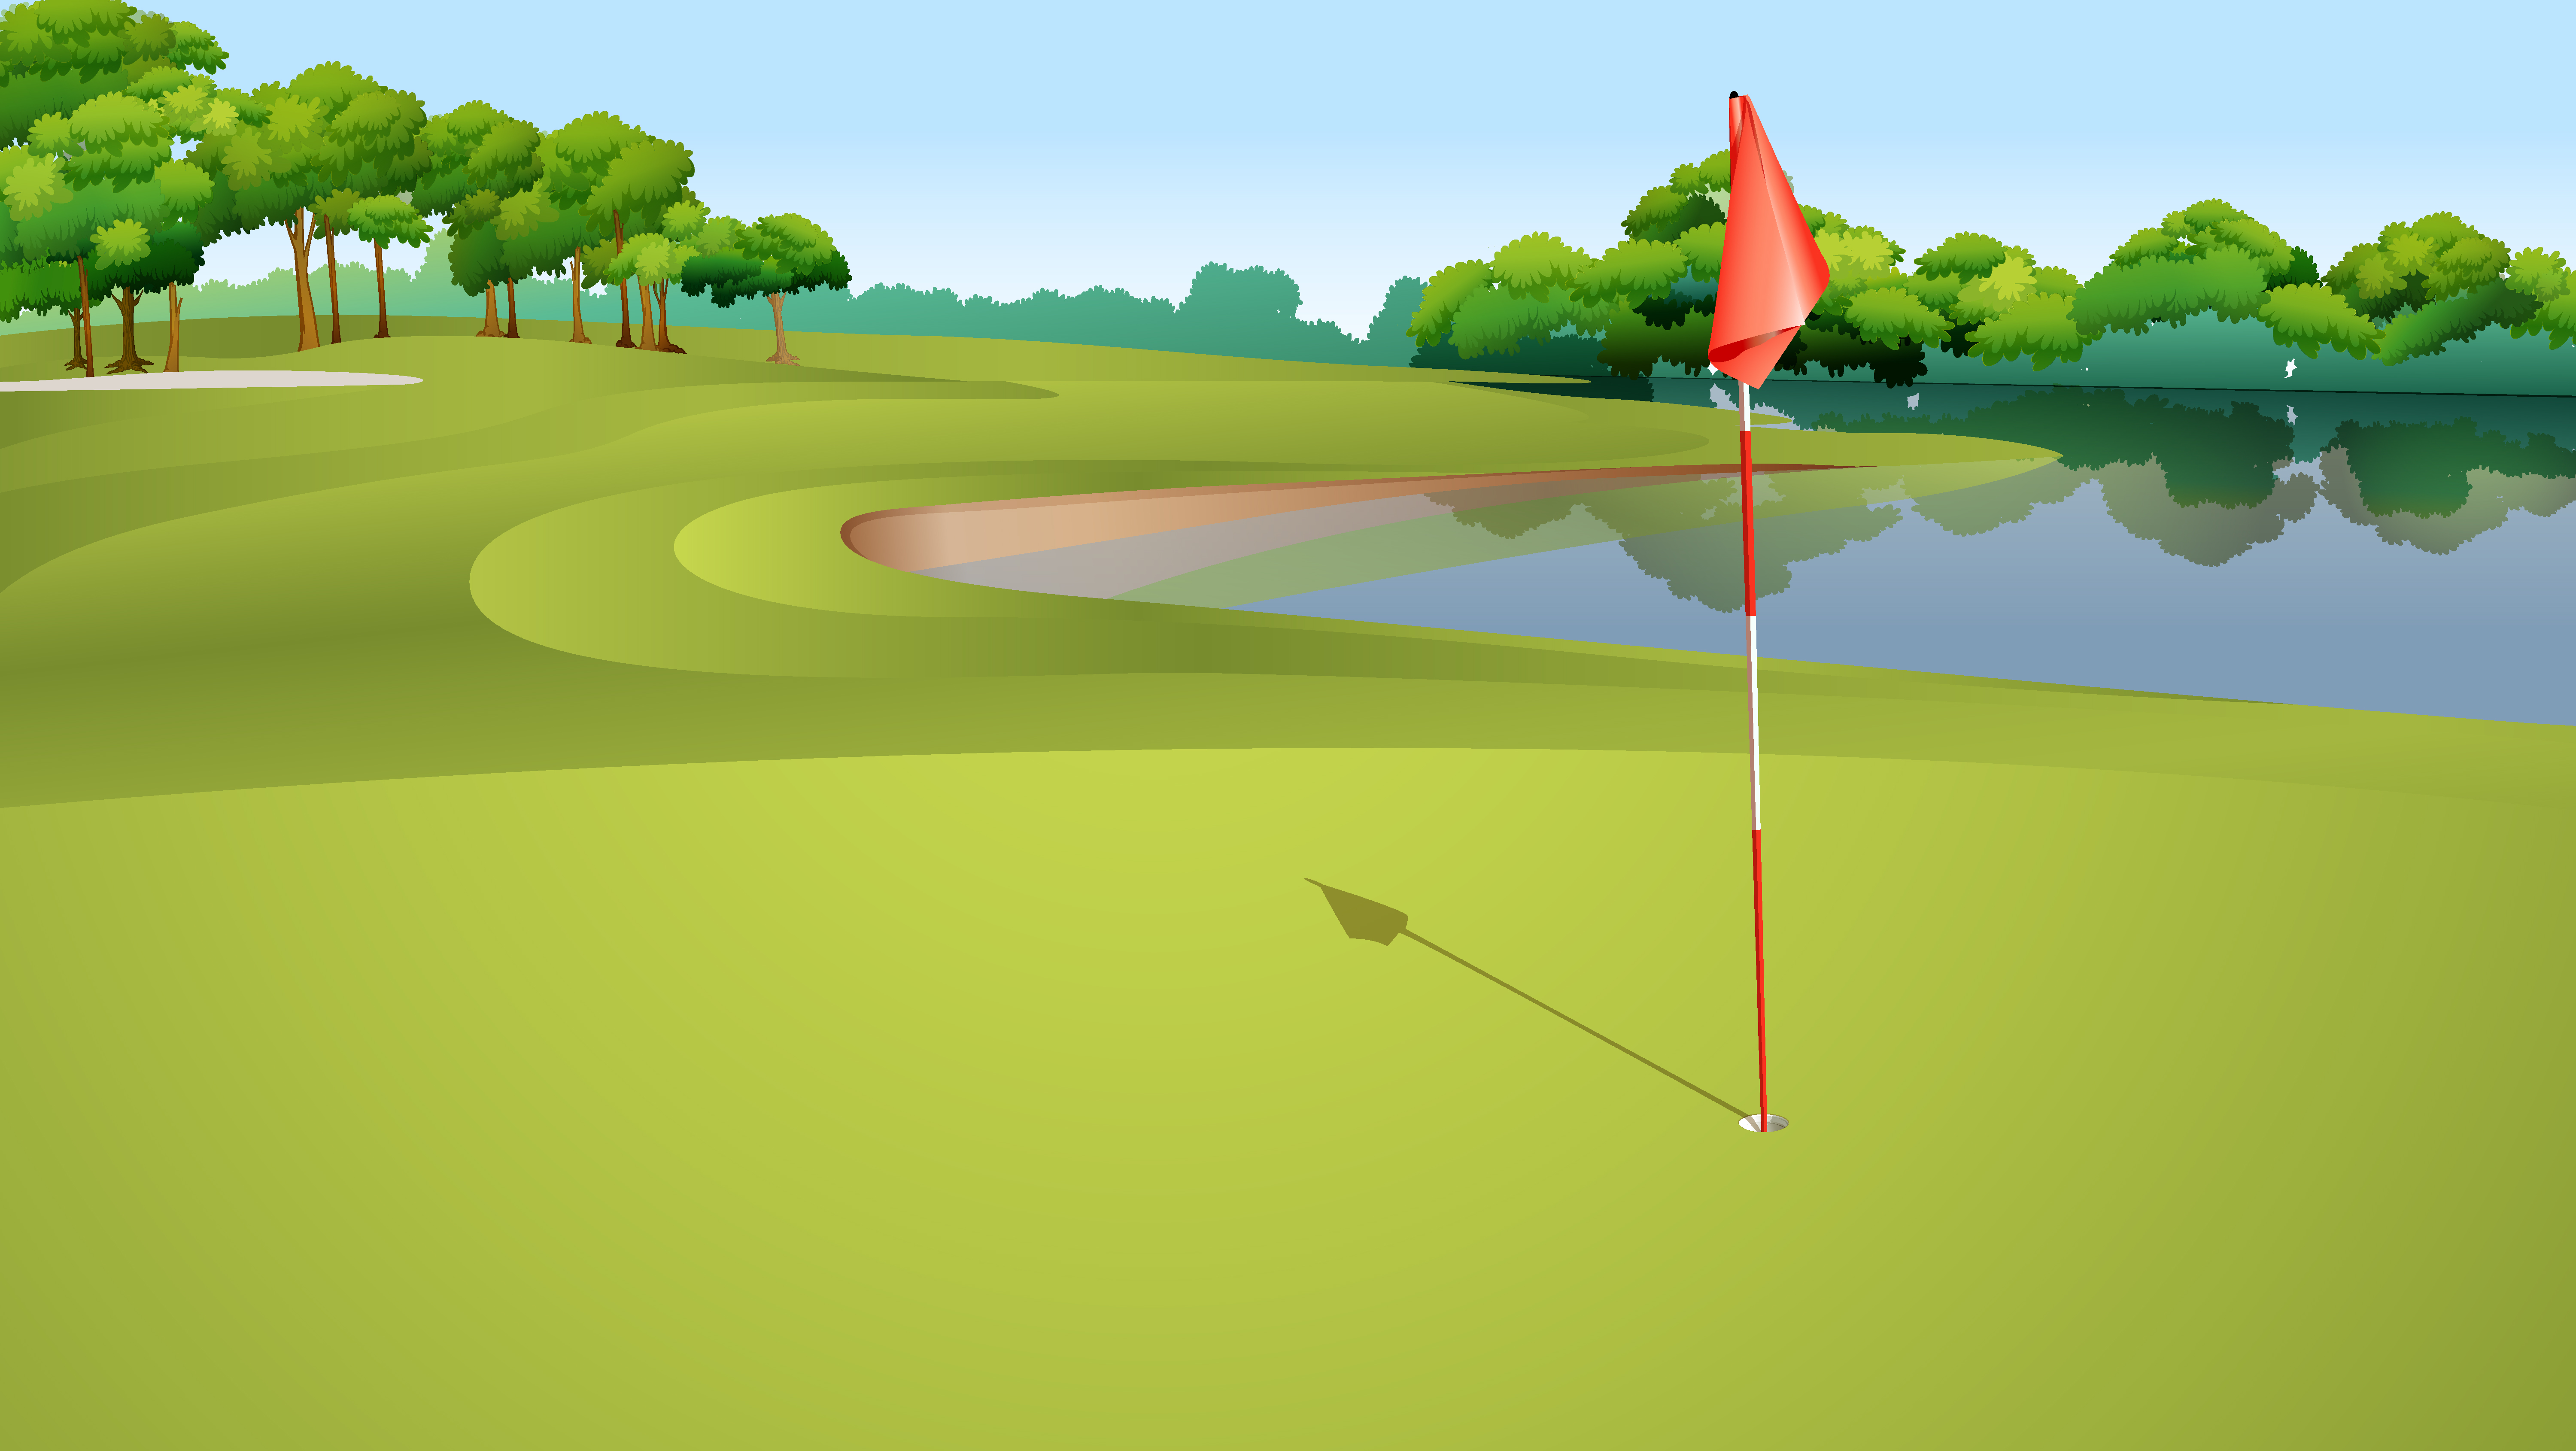 Clipart Pictures Of Golf Clubs